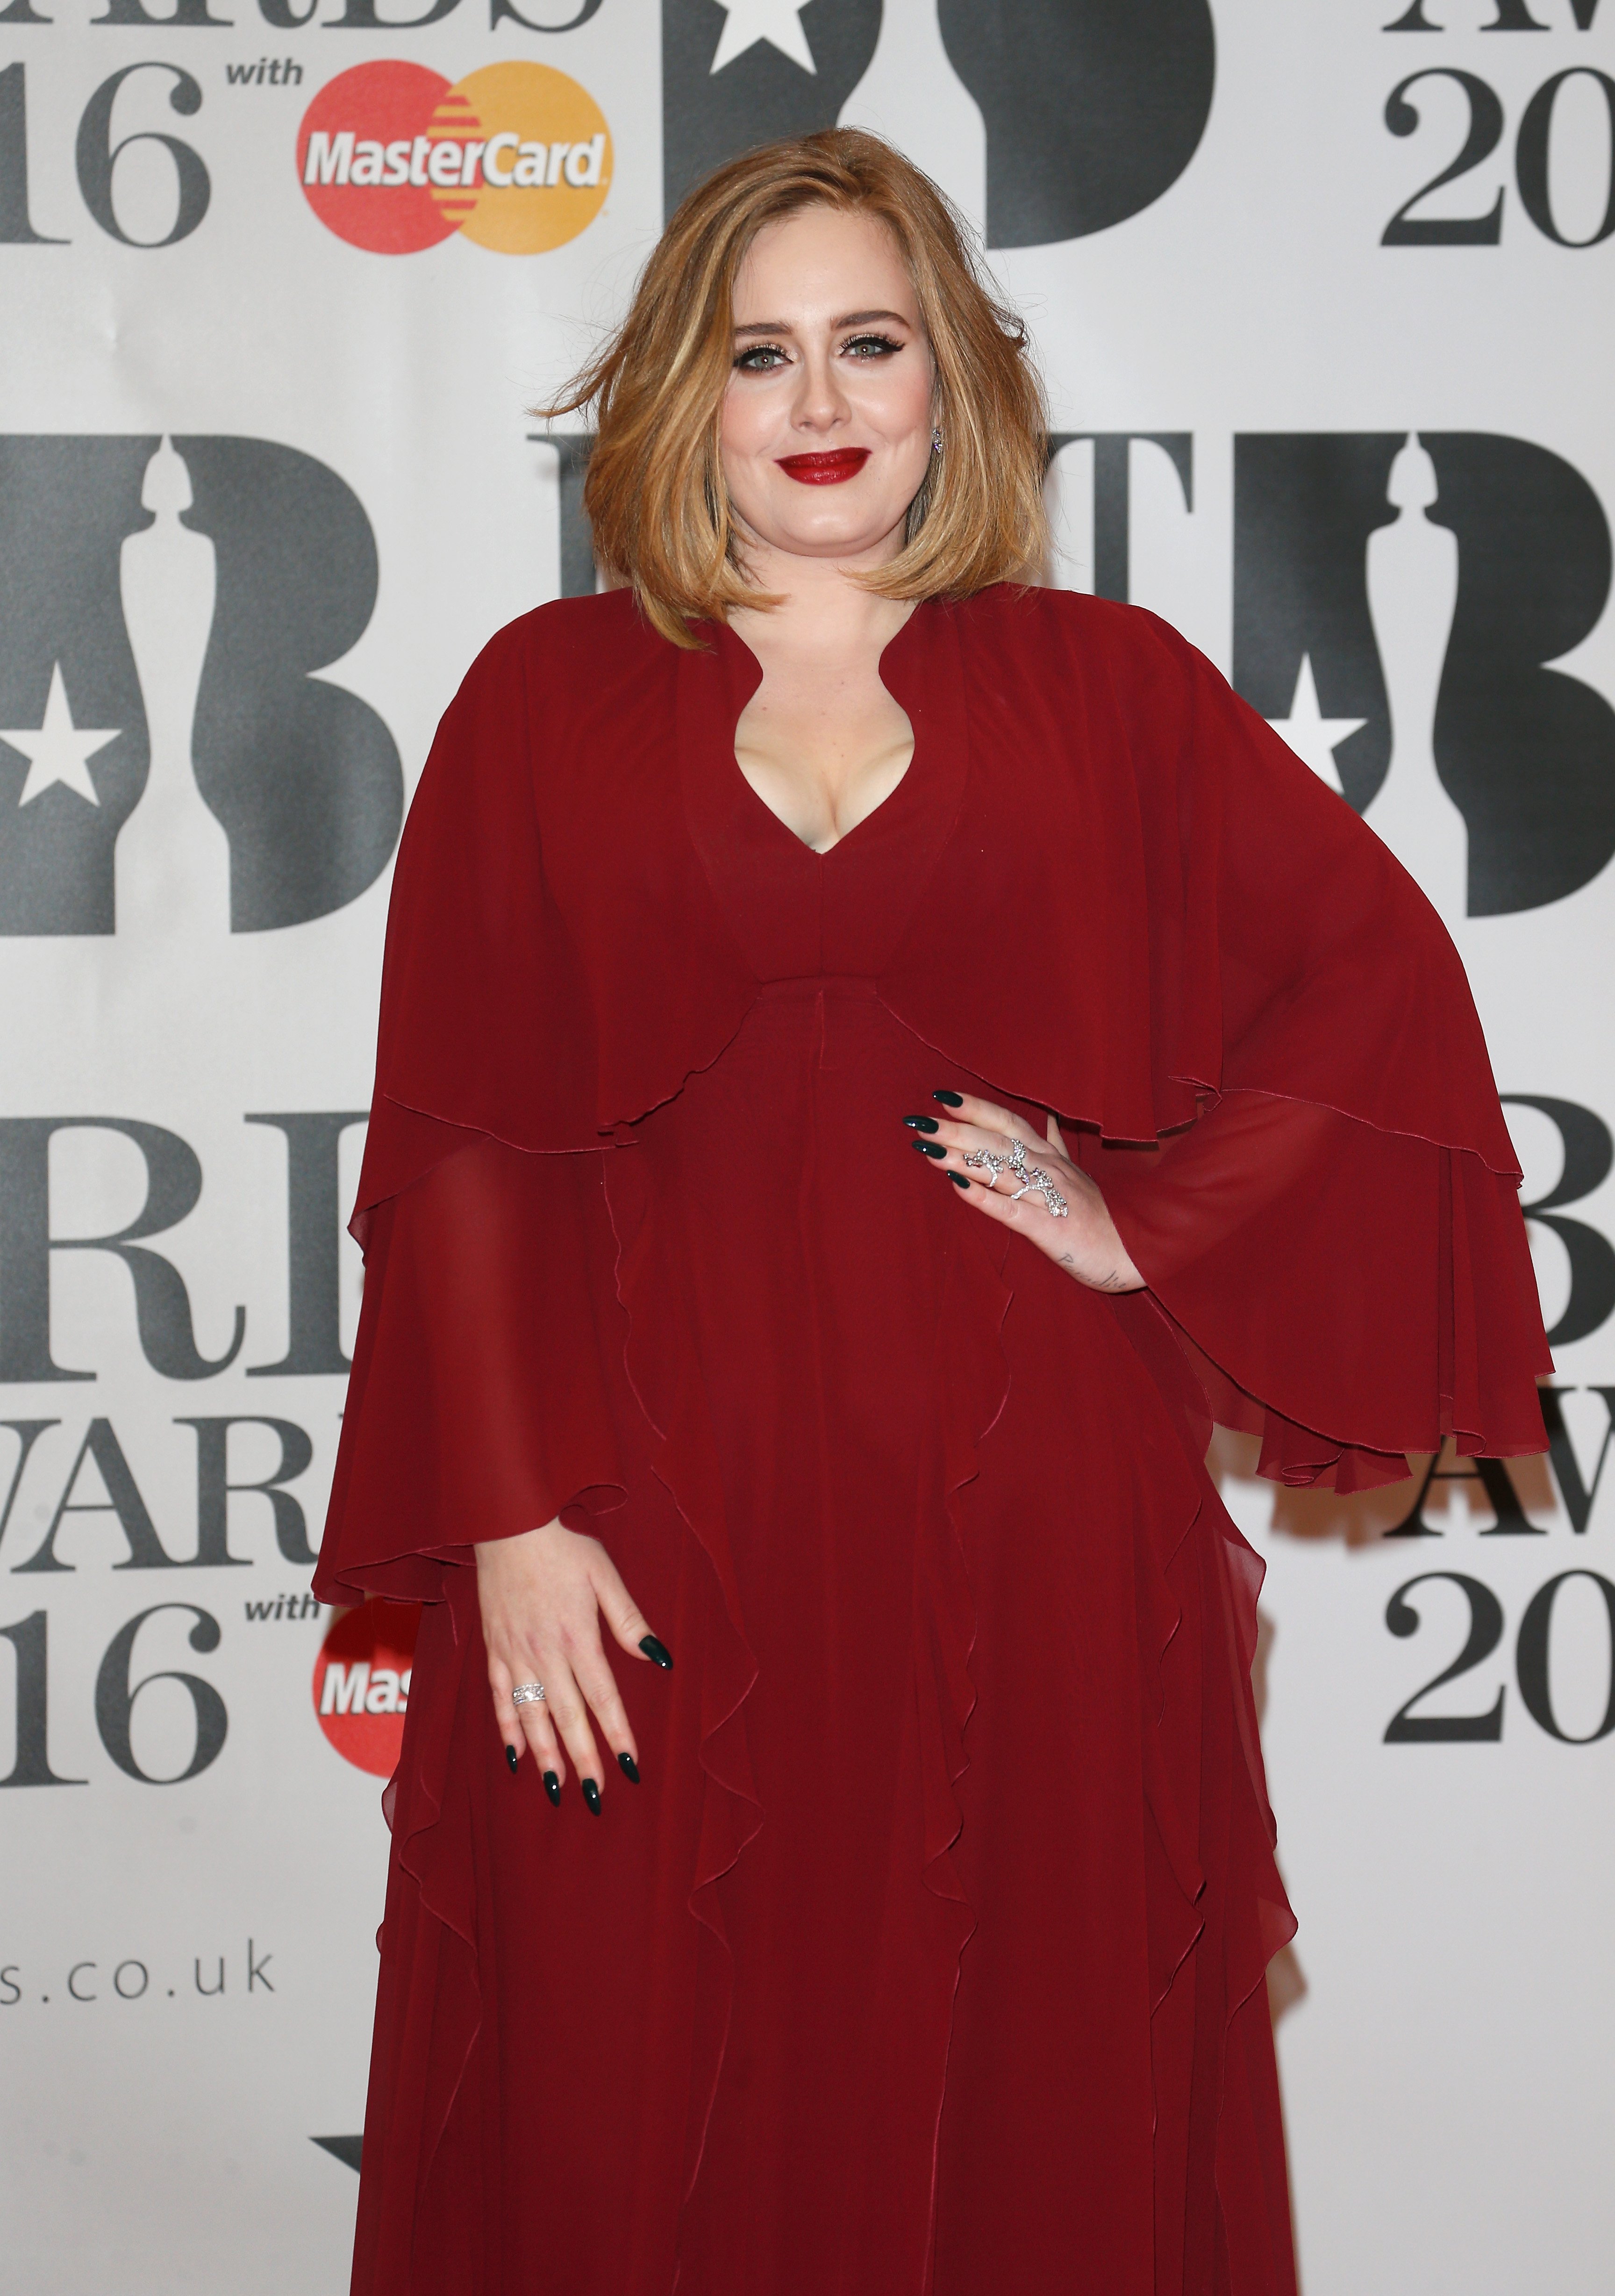 Adele attends the BRIT Awards 2016 at The O2 Arena on February 24, 2016 in London, England | Photo: Getty Images